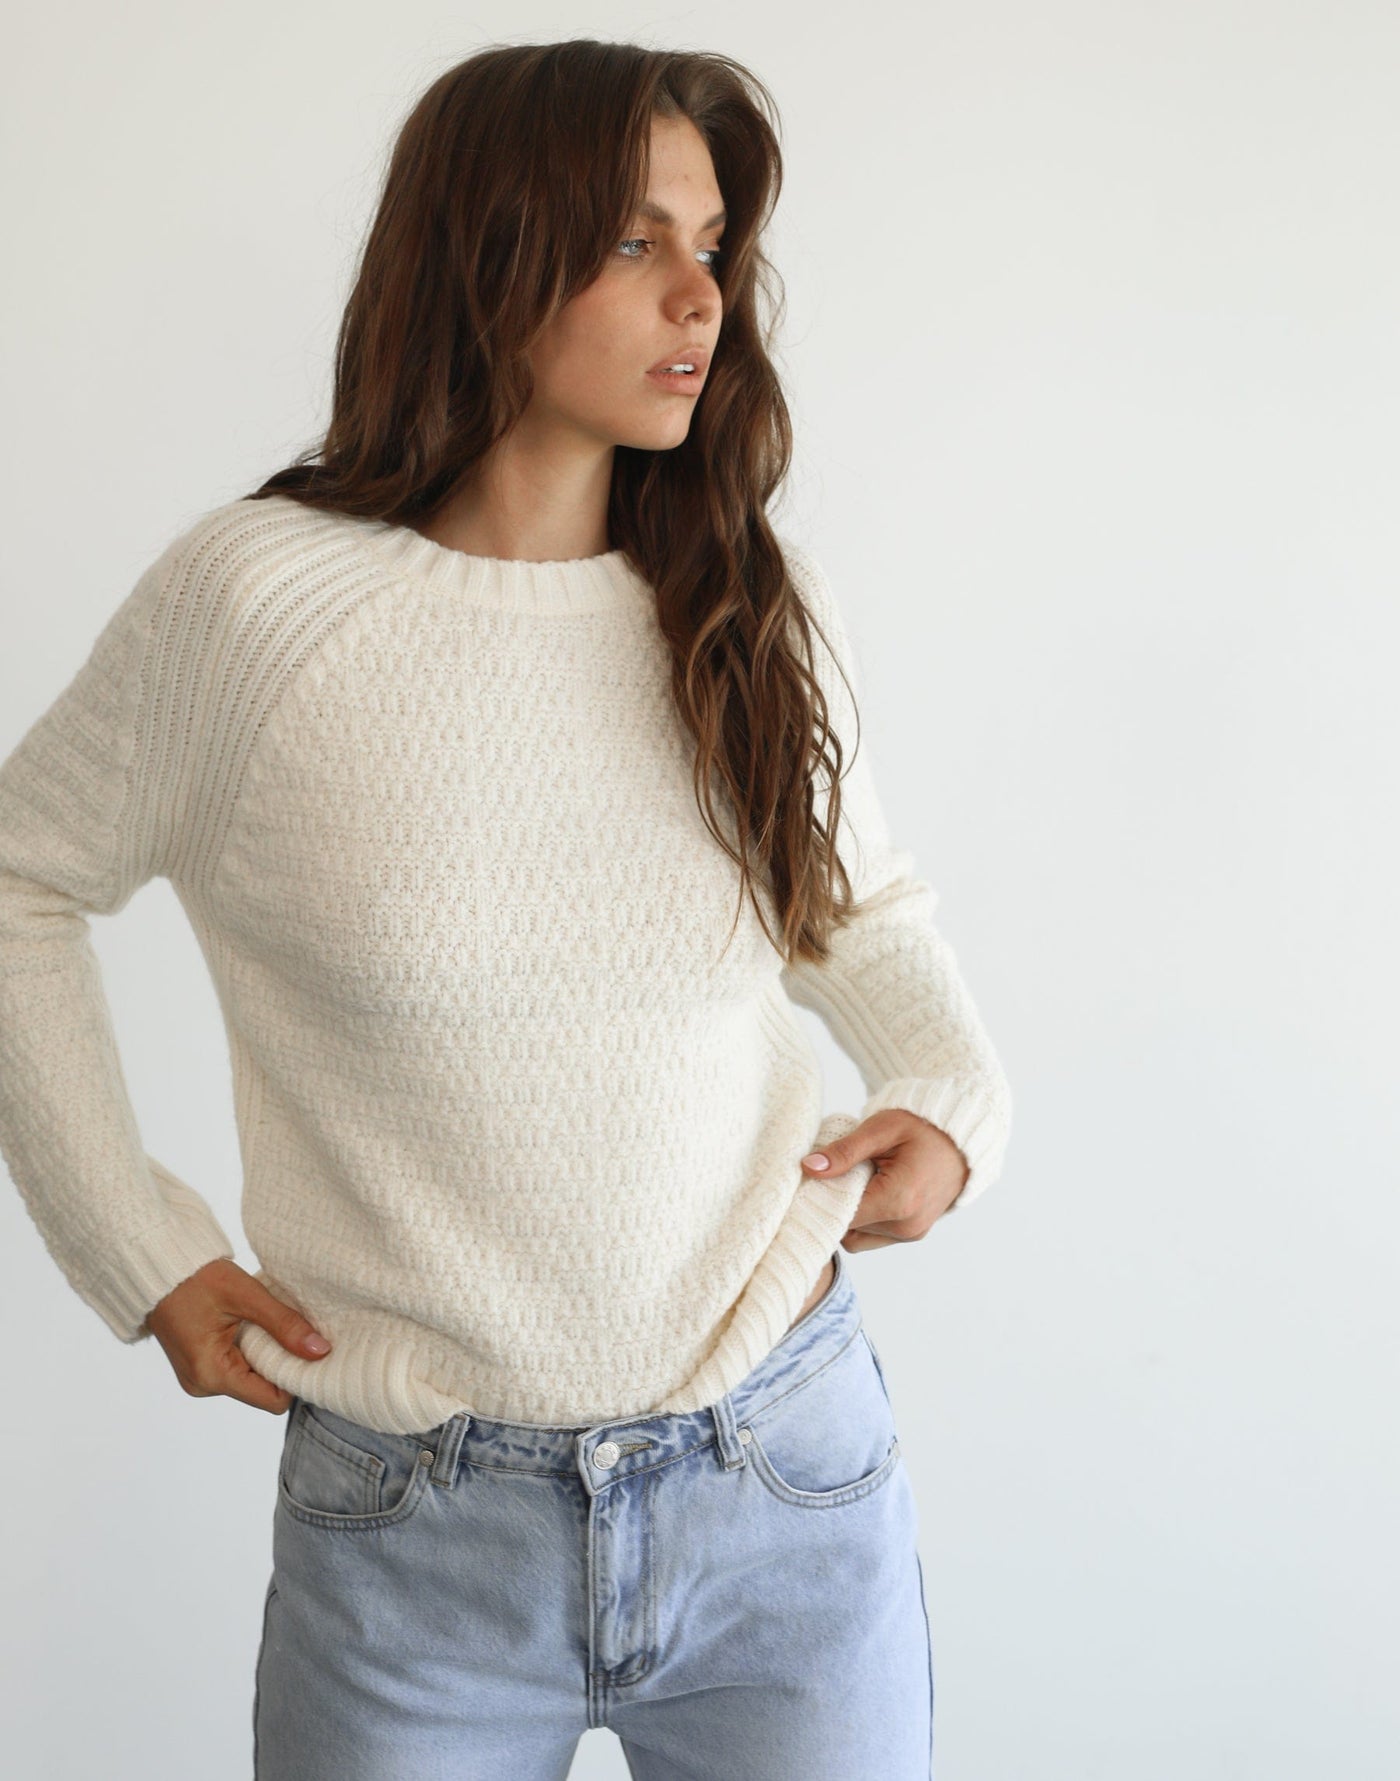 Sivan Sweater (White) - White Sweater - Women's Outerwear - Charcoal Clothing